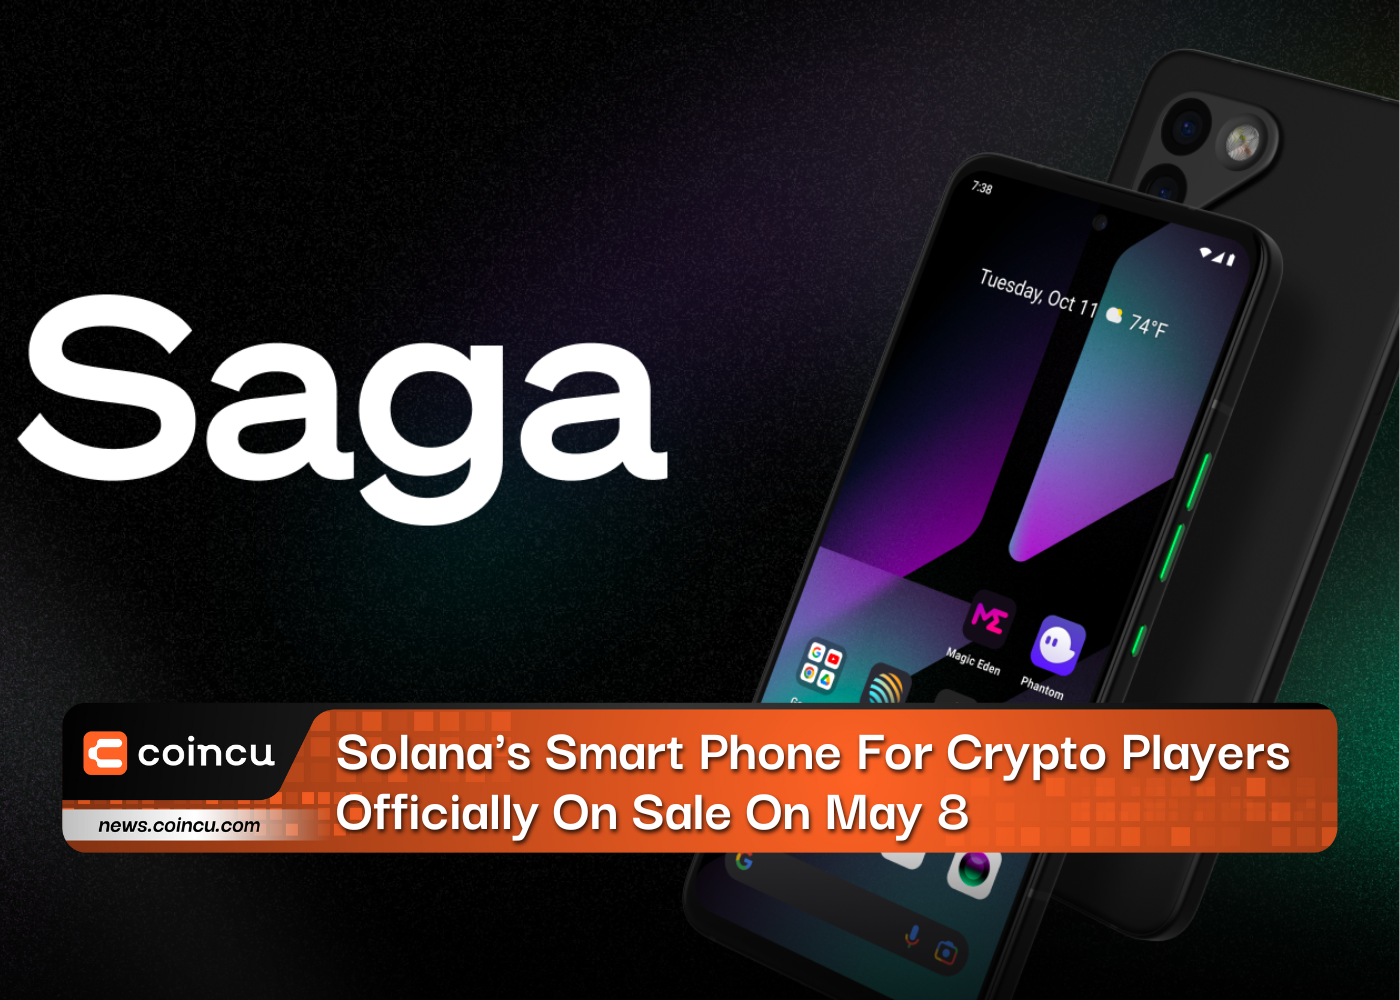 Solana's Smart Phone For Crypto Players Officially On Sale On May 8